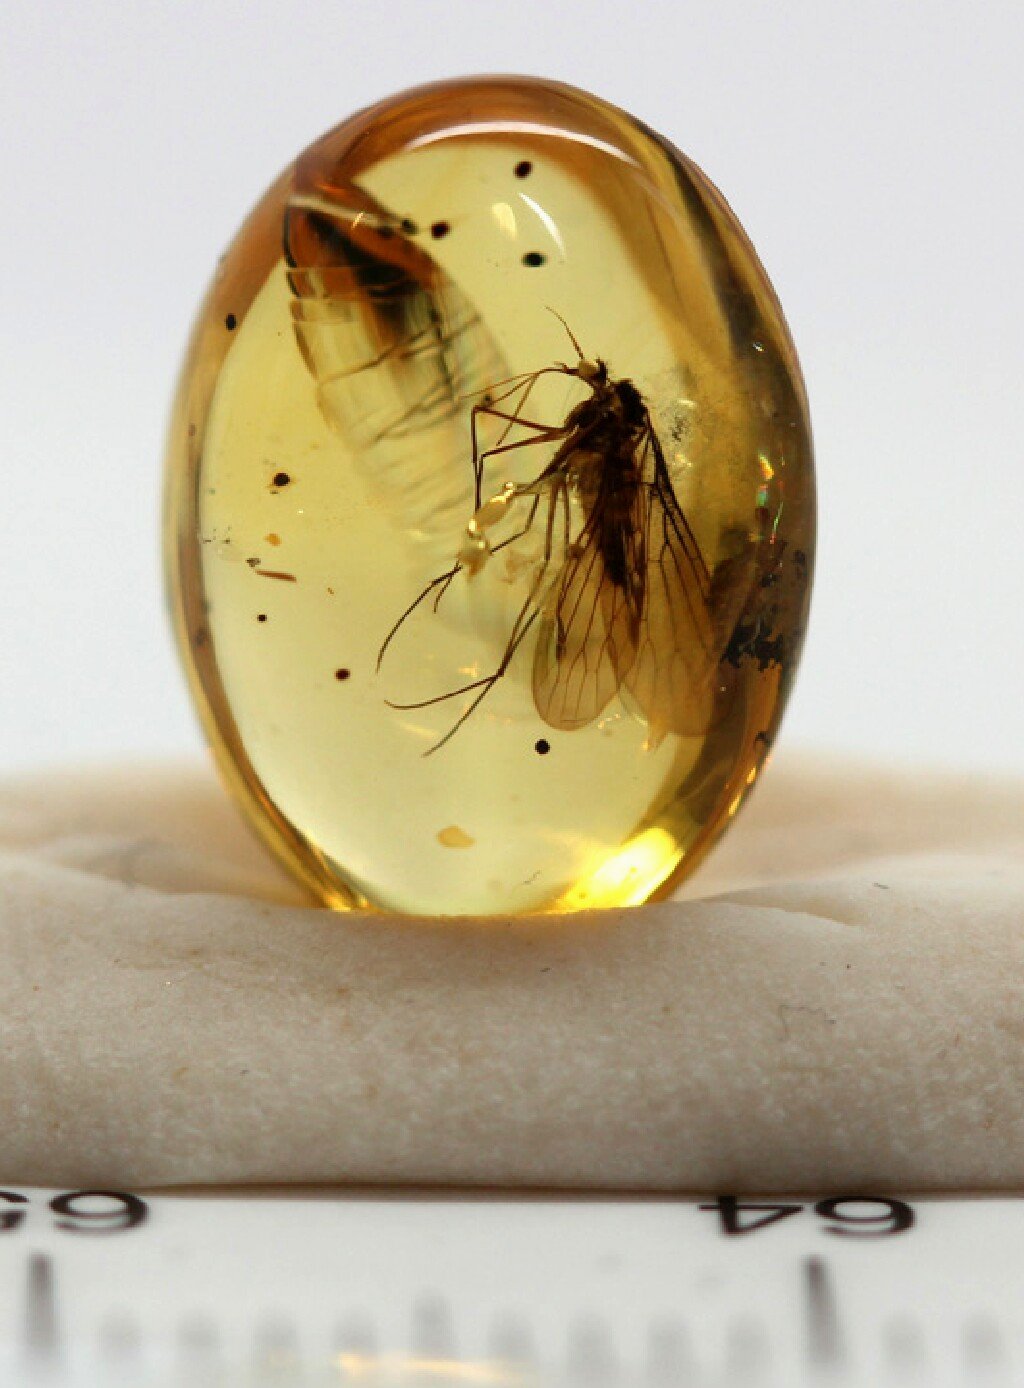 Untreated Clean Natural Burmite Burma Myanmar Amber Insect dinosaur age fossil 